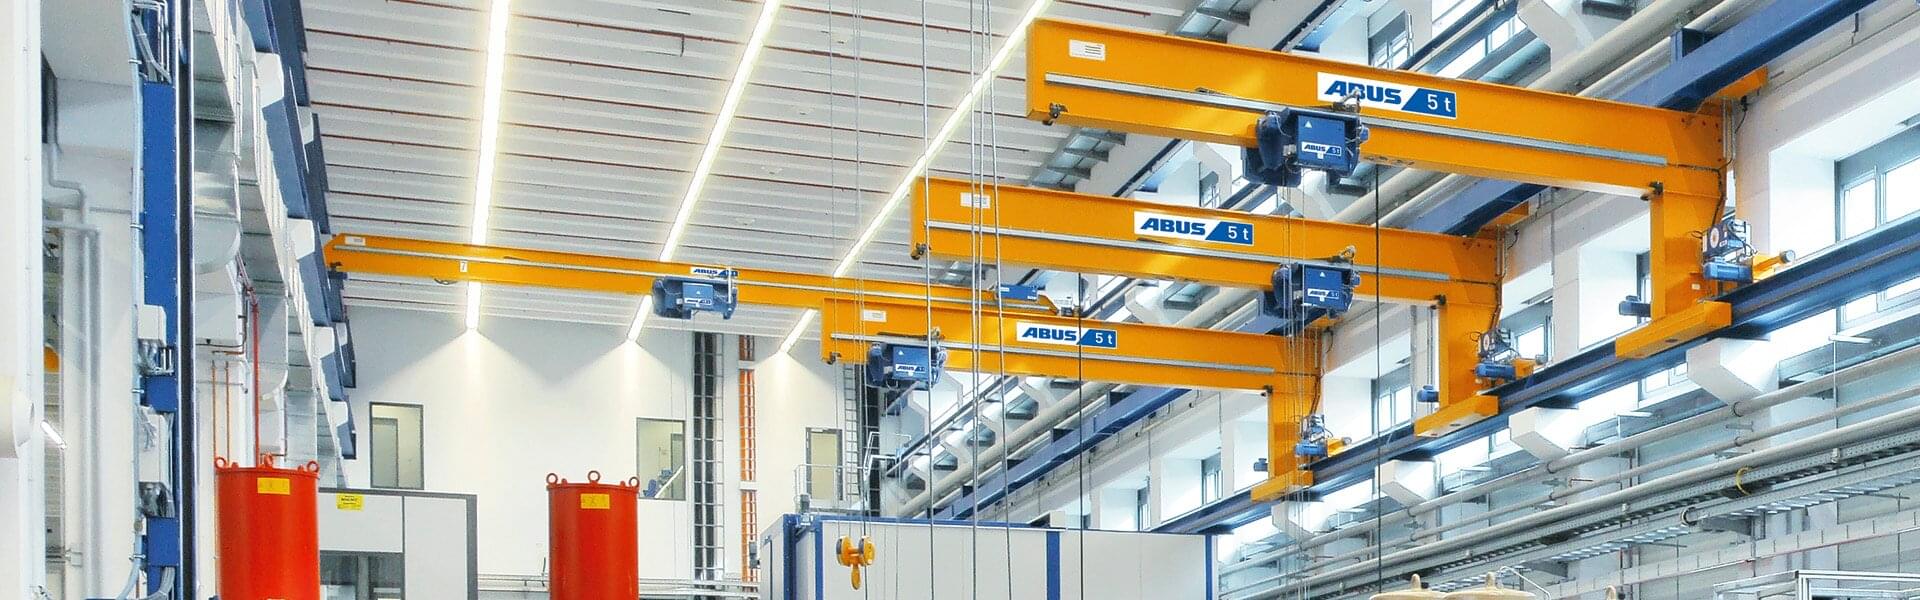 Wall-mounted overhead travelling cranes at the Samson company in Frankfurt